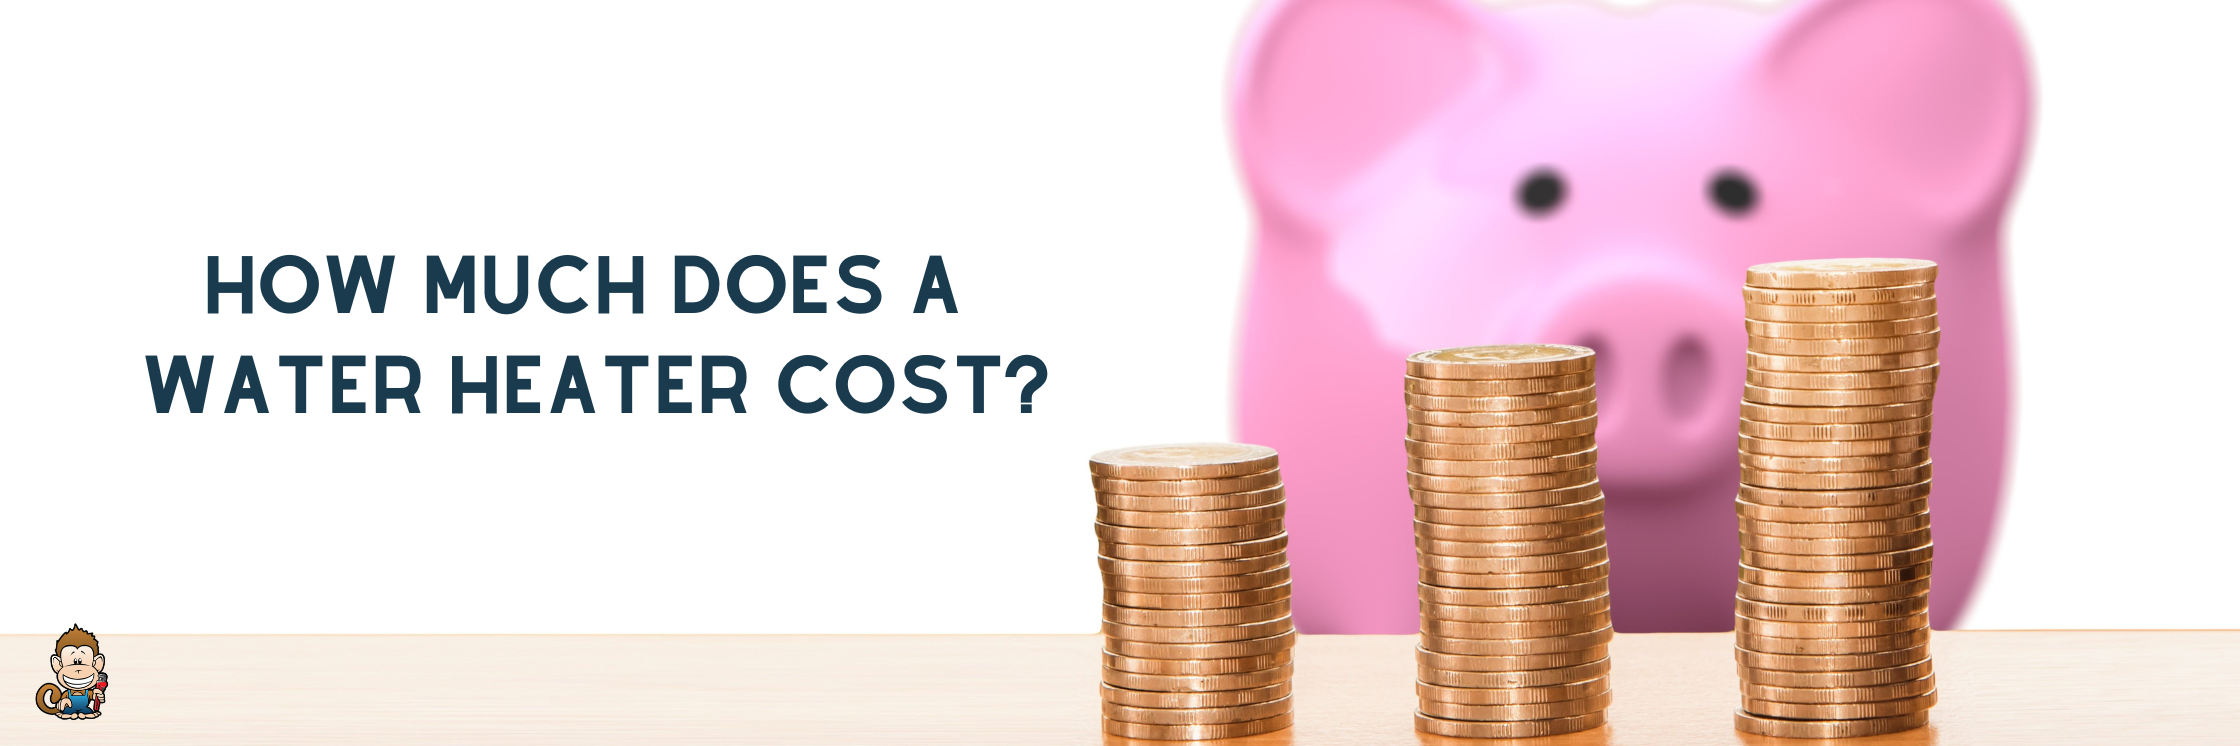 How Much Does a Water Heater Cost?